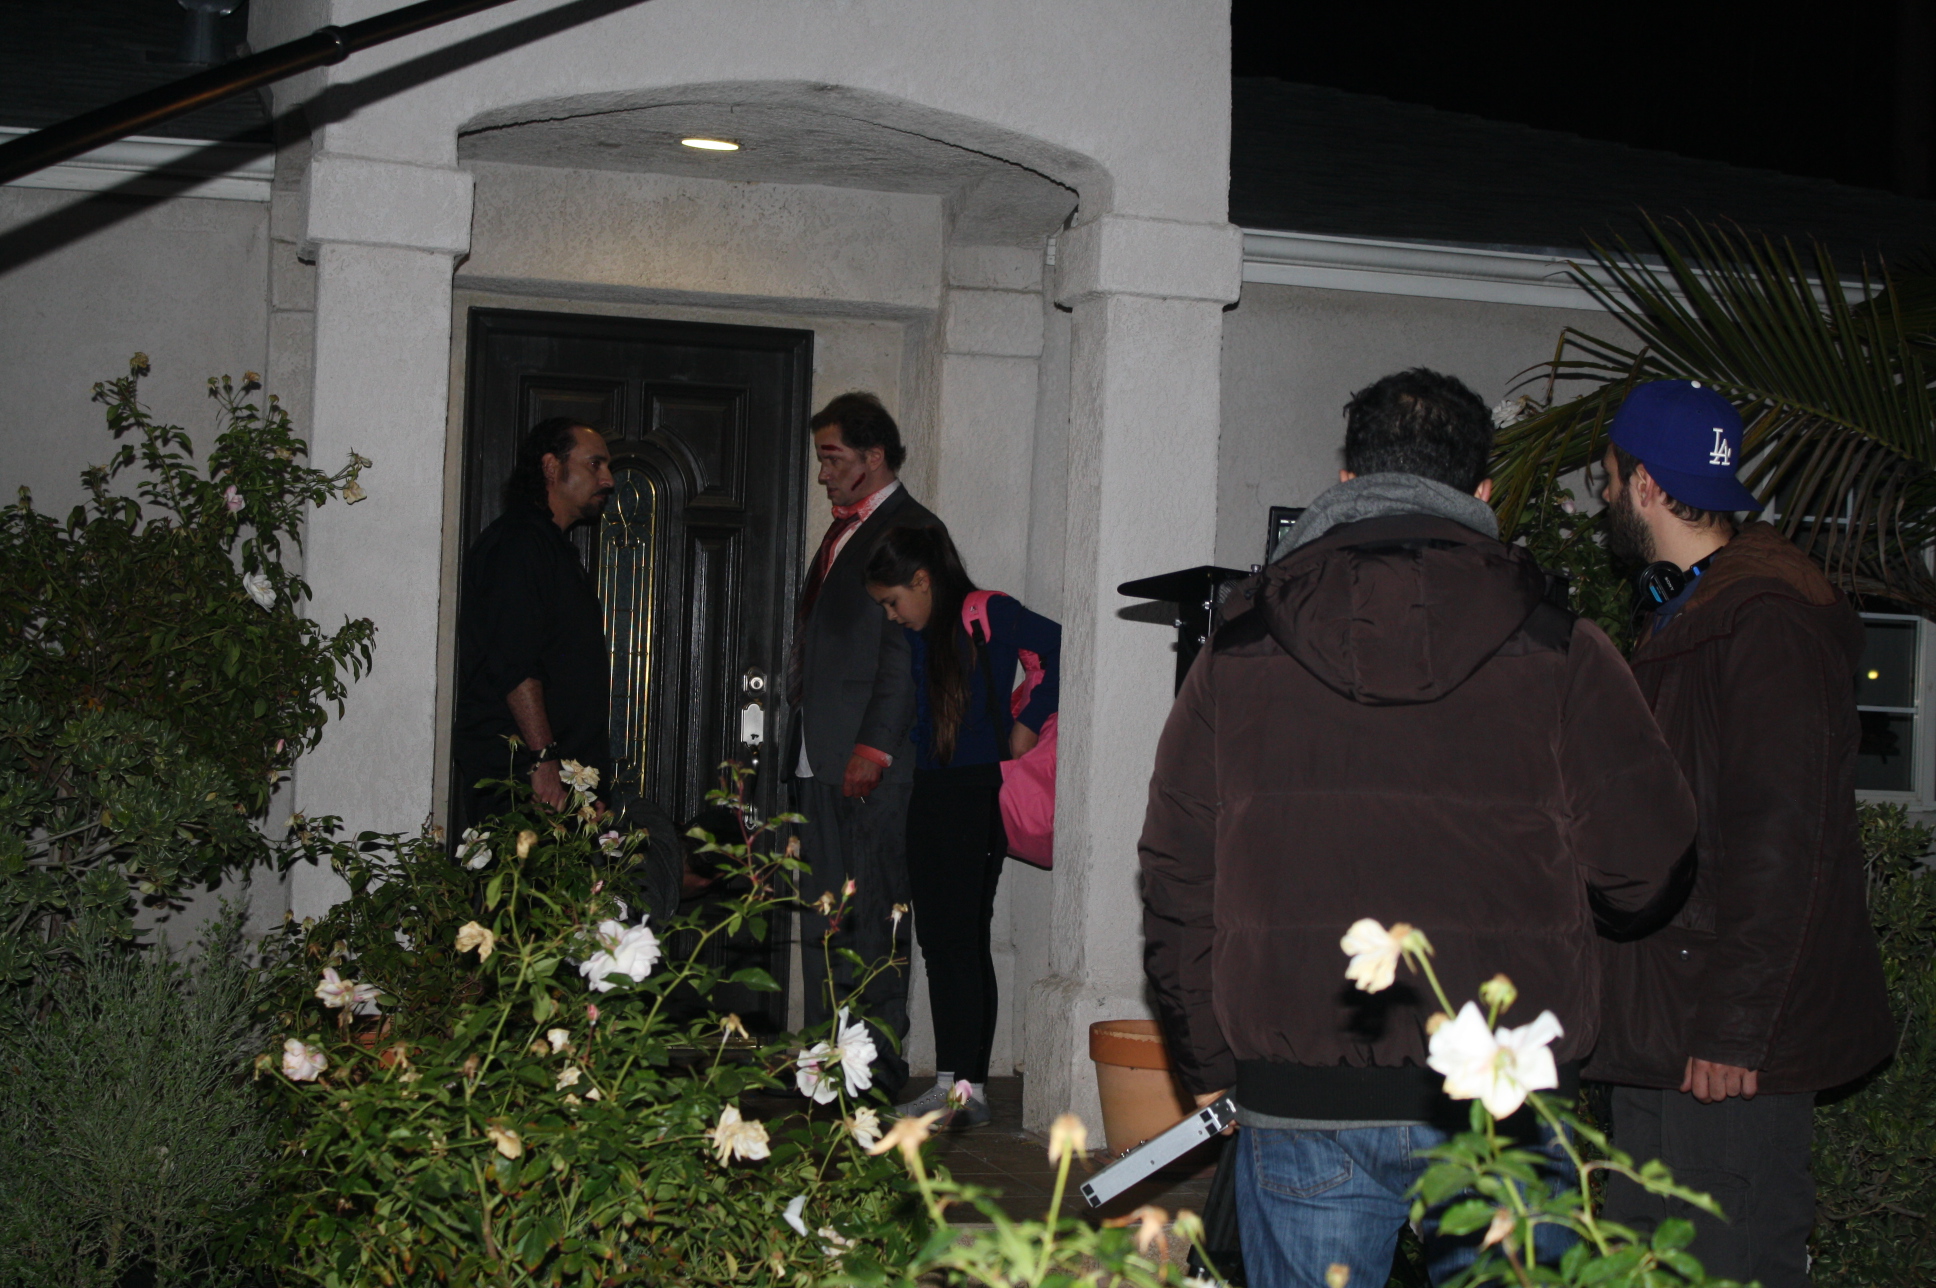 Sam Osman (left) and Jamie Kennedy (right) at the front door of the house, getting ready for a Film Scene on the set of 